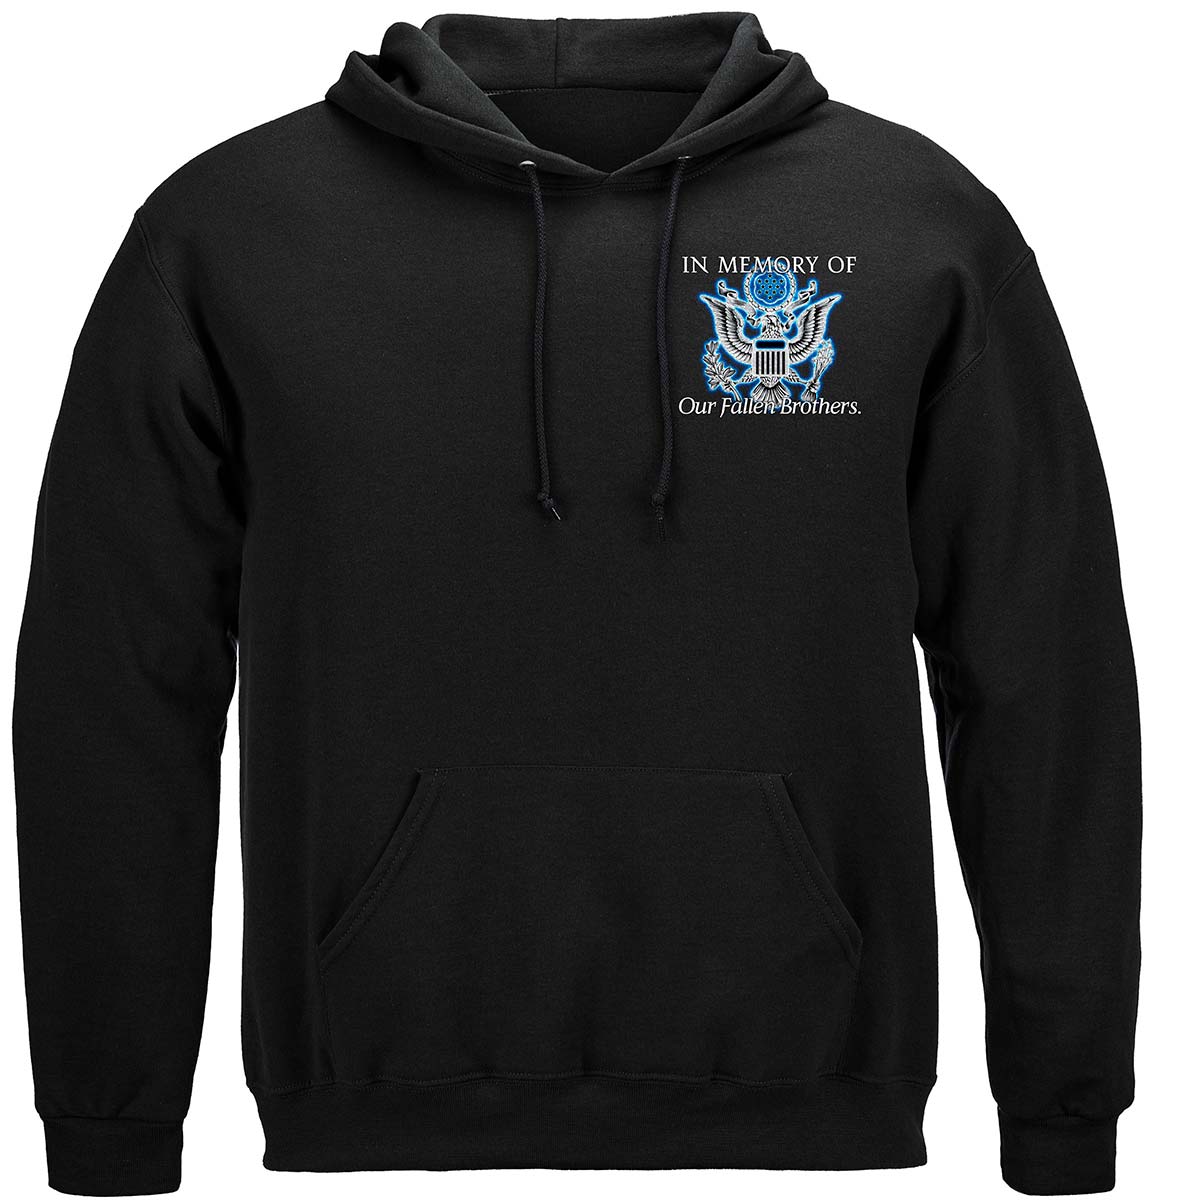 Army Gave All Premium Hooded Sweat Shirt